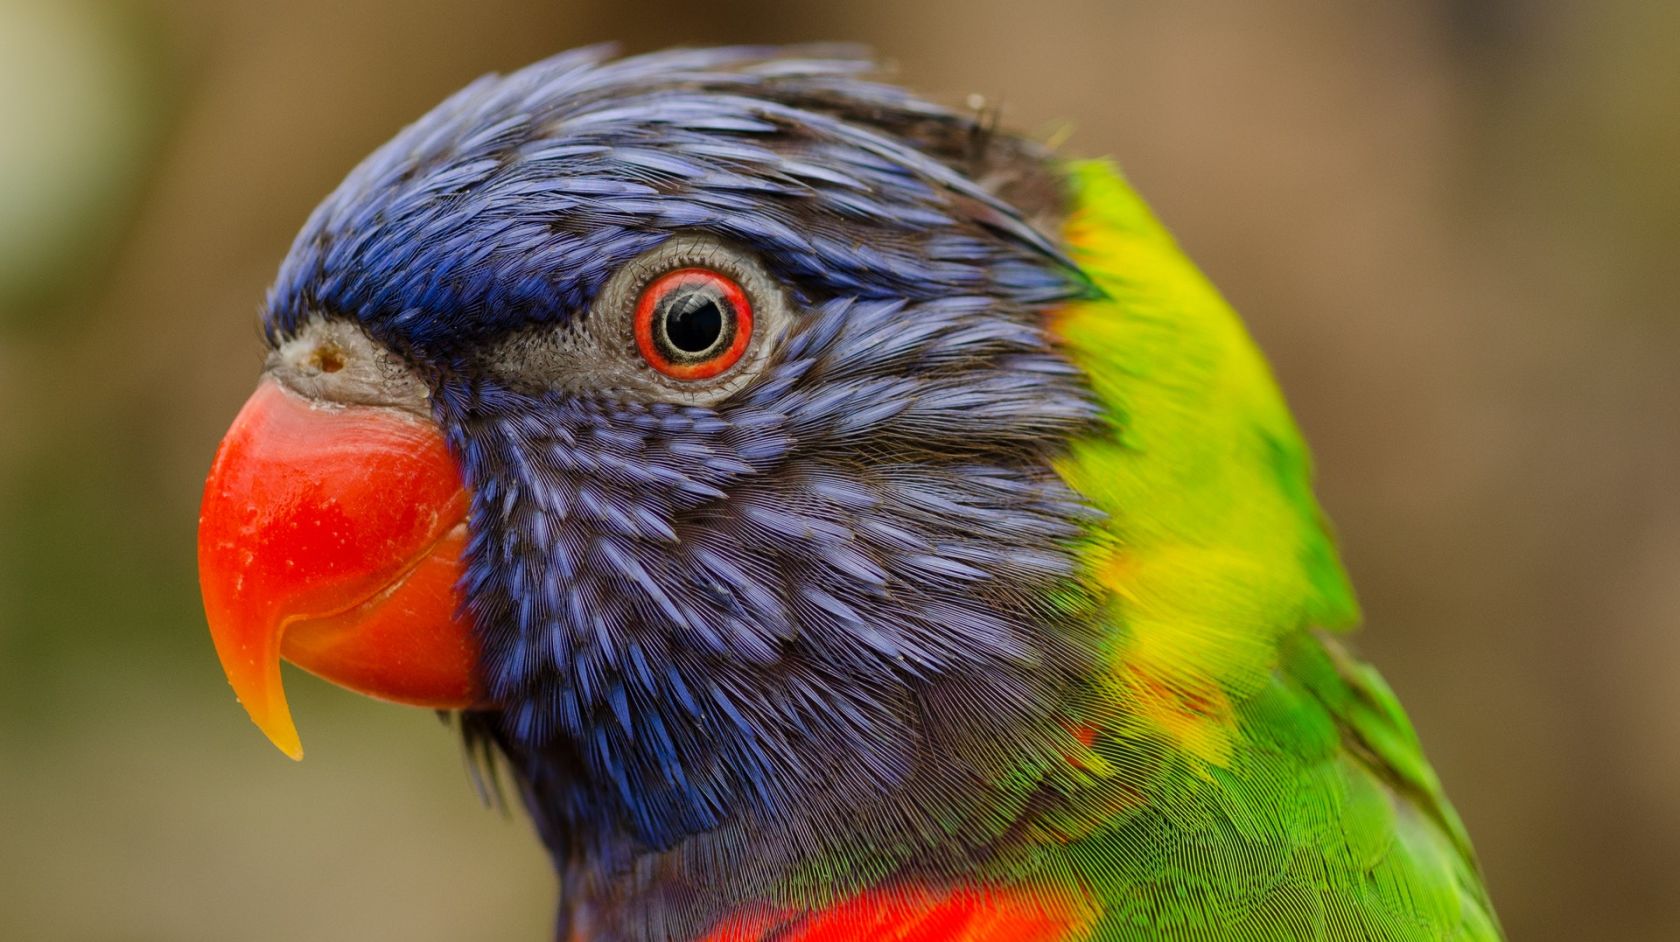 A Colorful Bird Perched On Top Of A Parrot